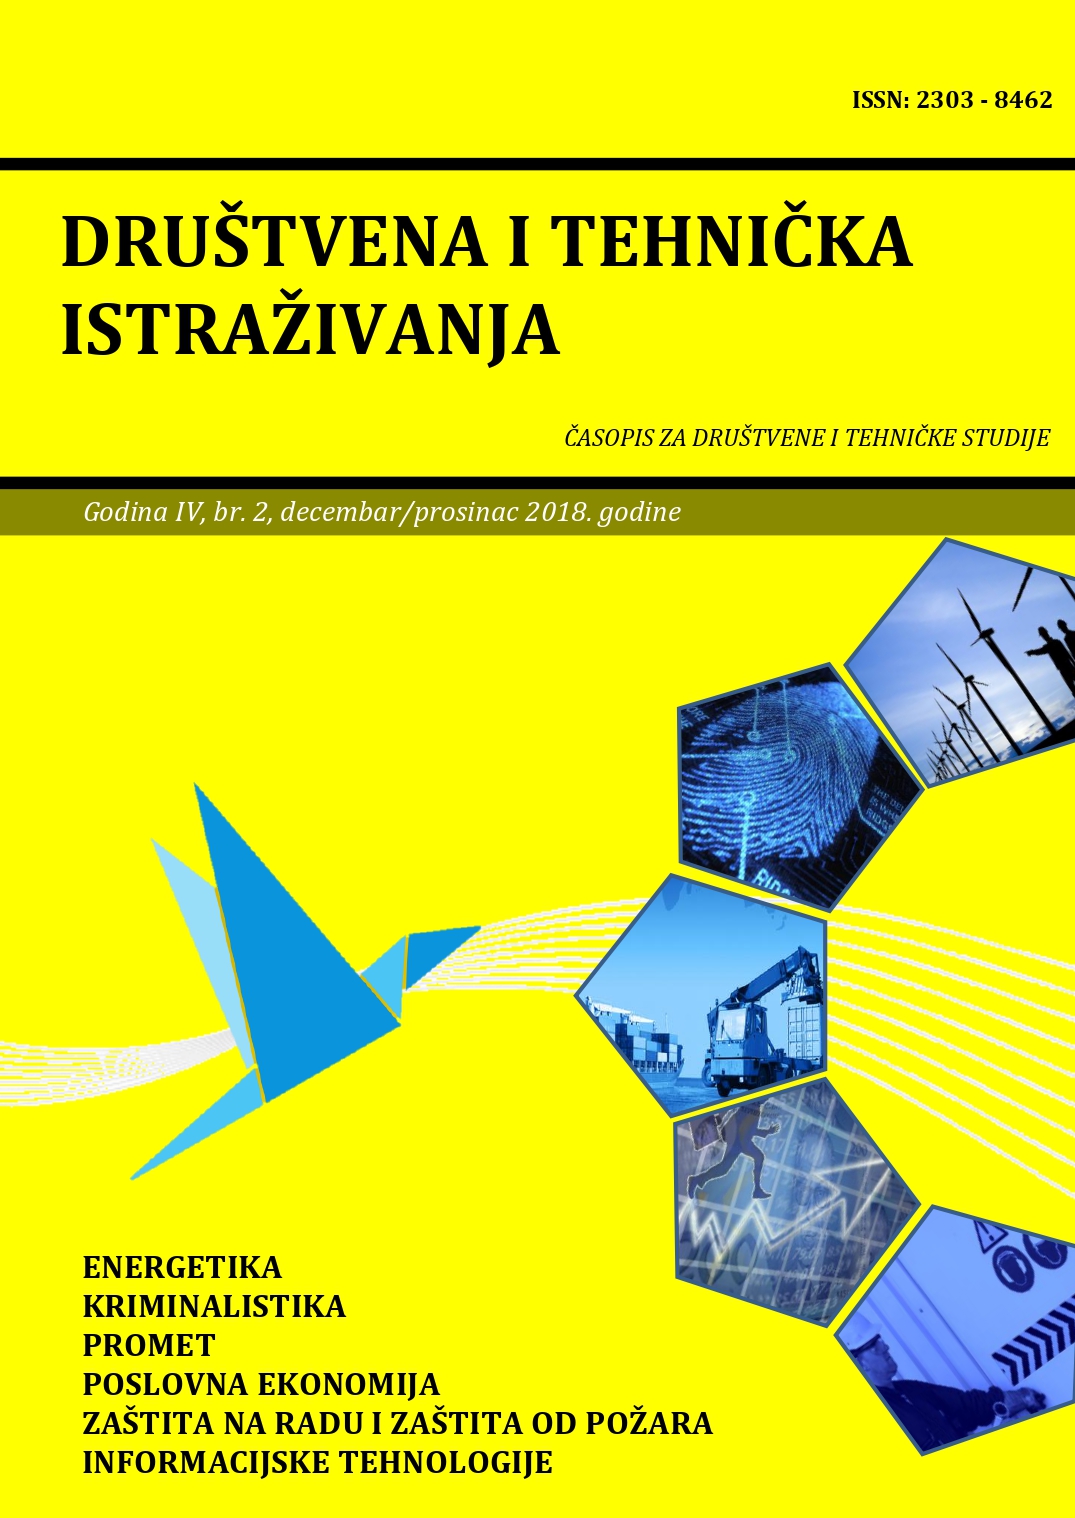 THE SIGNIFICANCE, LEGAL FRAMEWORK AND SAFETY STATE OF PASSENGER BUS TRANSPORT IN THE POŽEGA-SLAVONIA COUNTY Cover Image